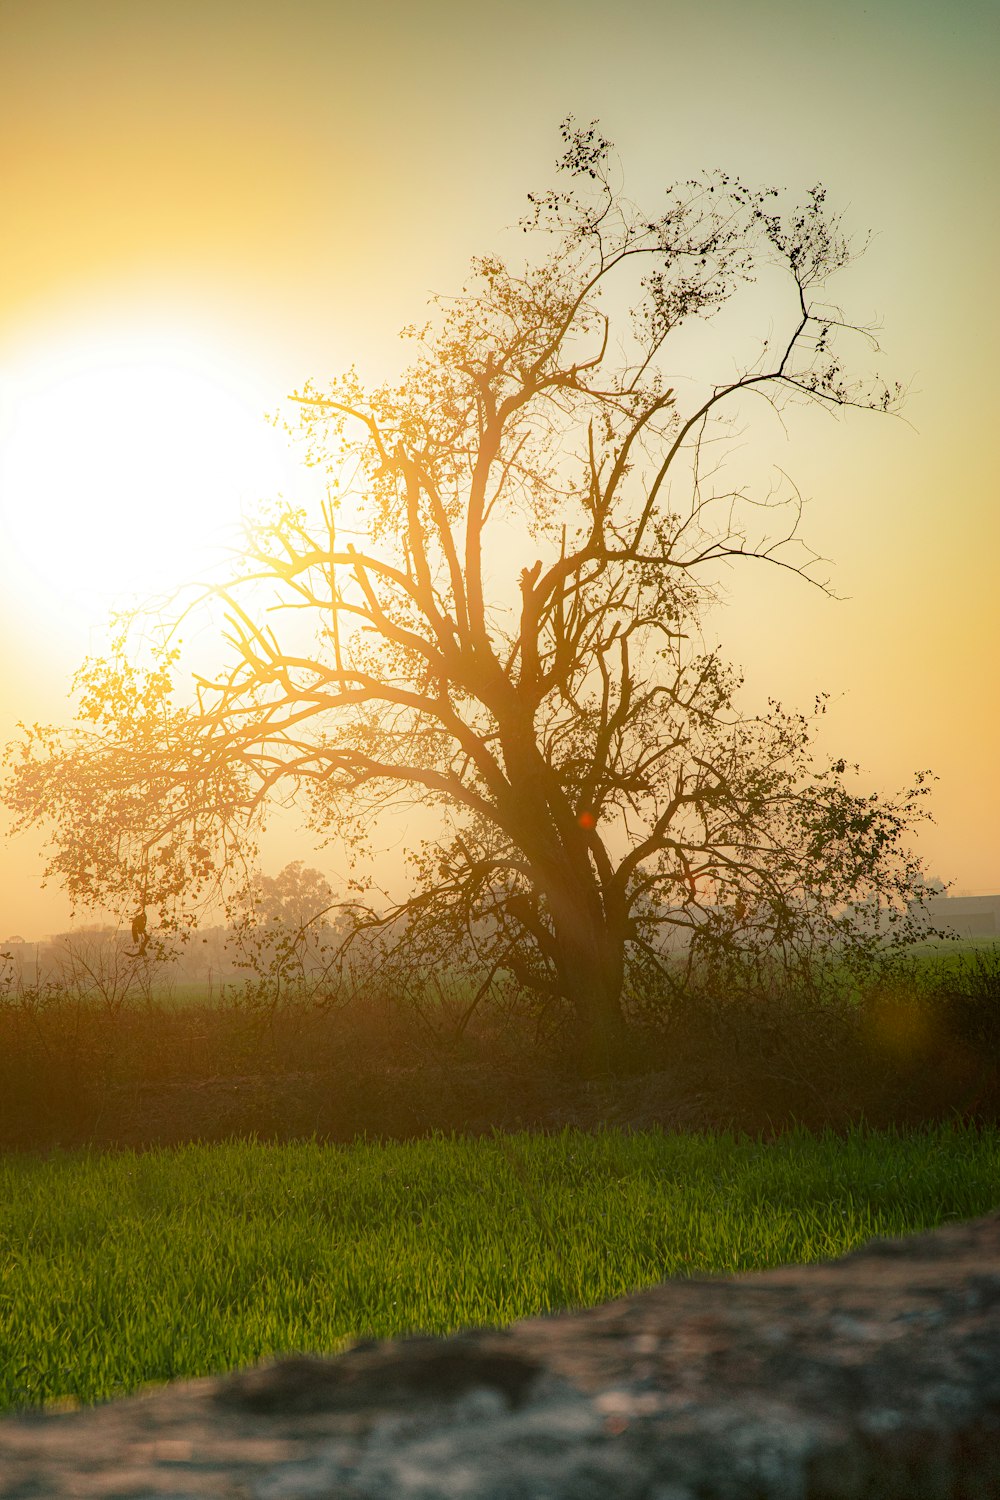 the sun is setting behind a tree in a field